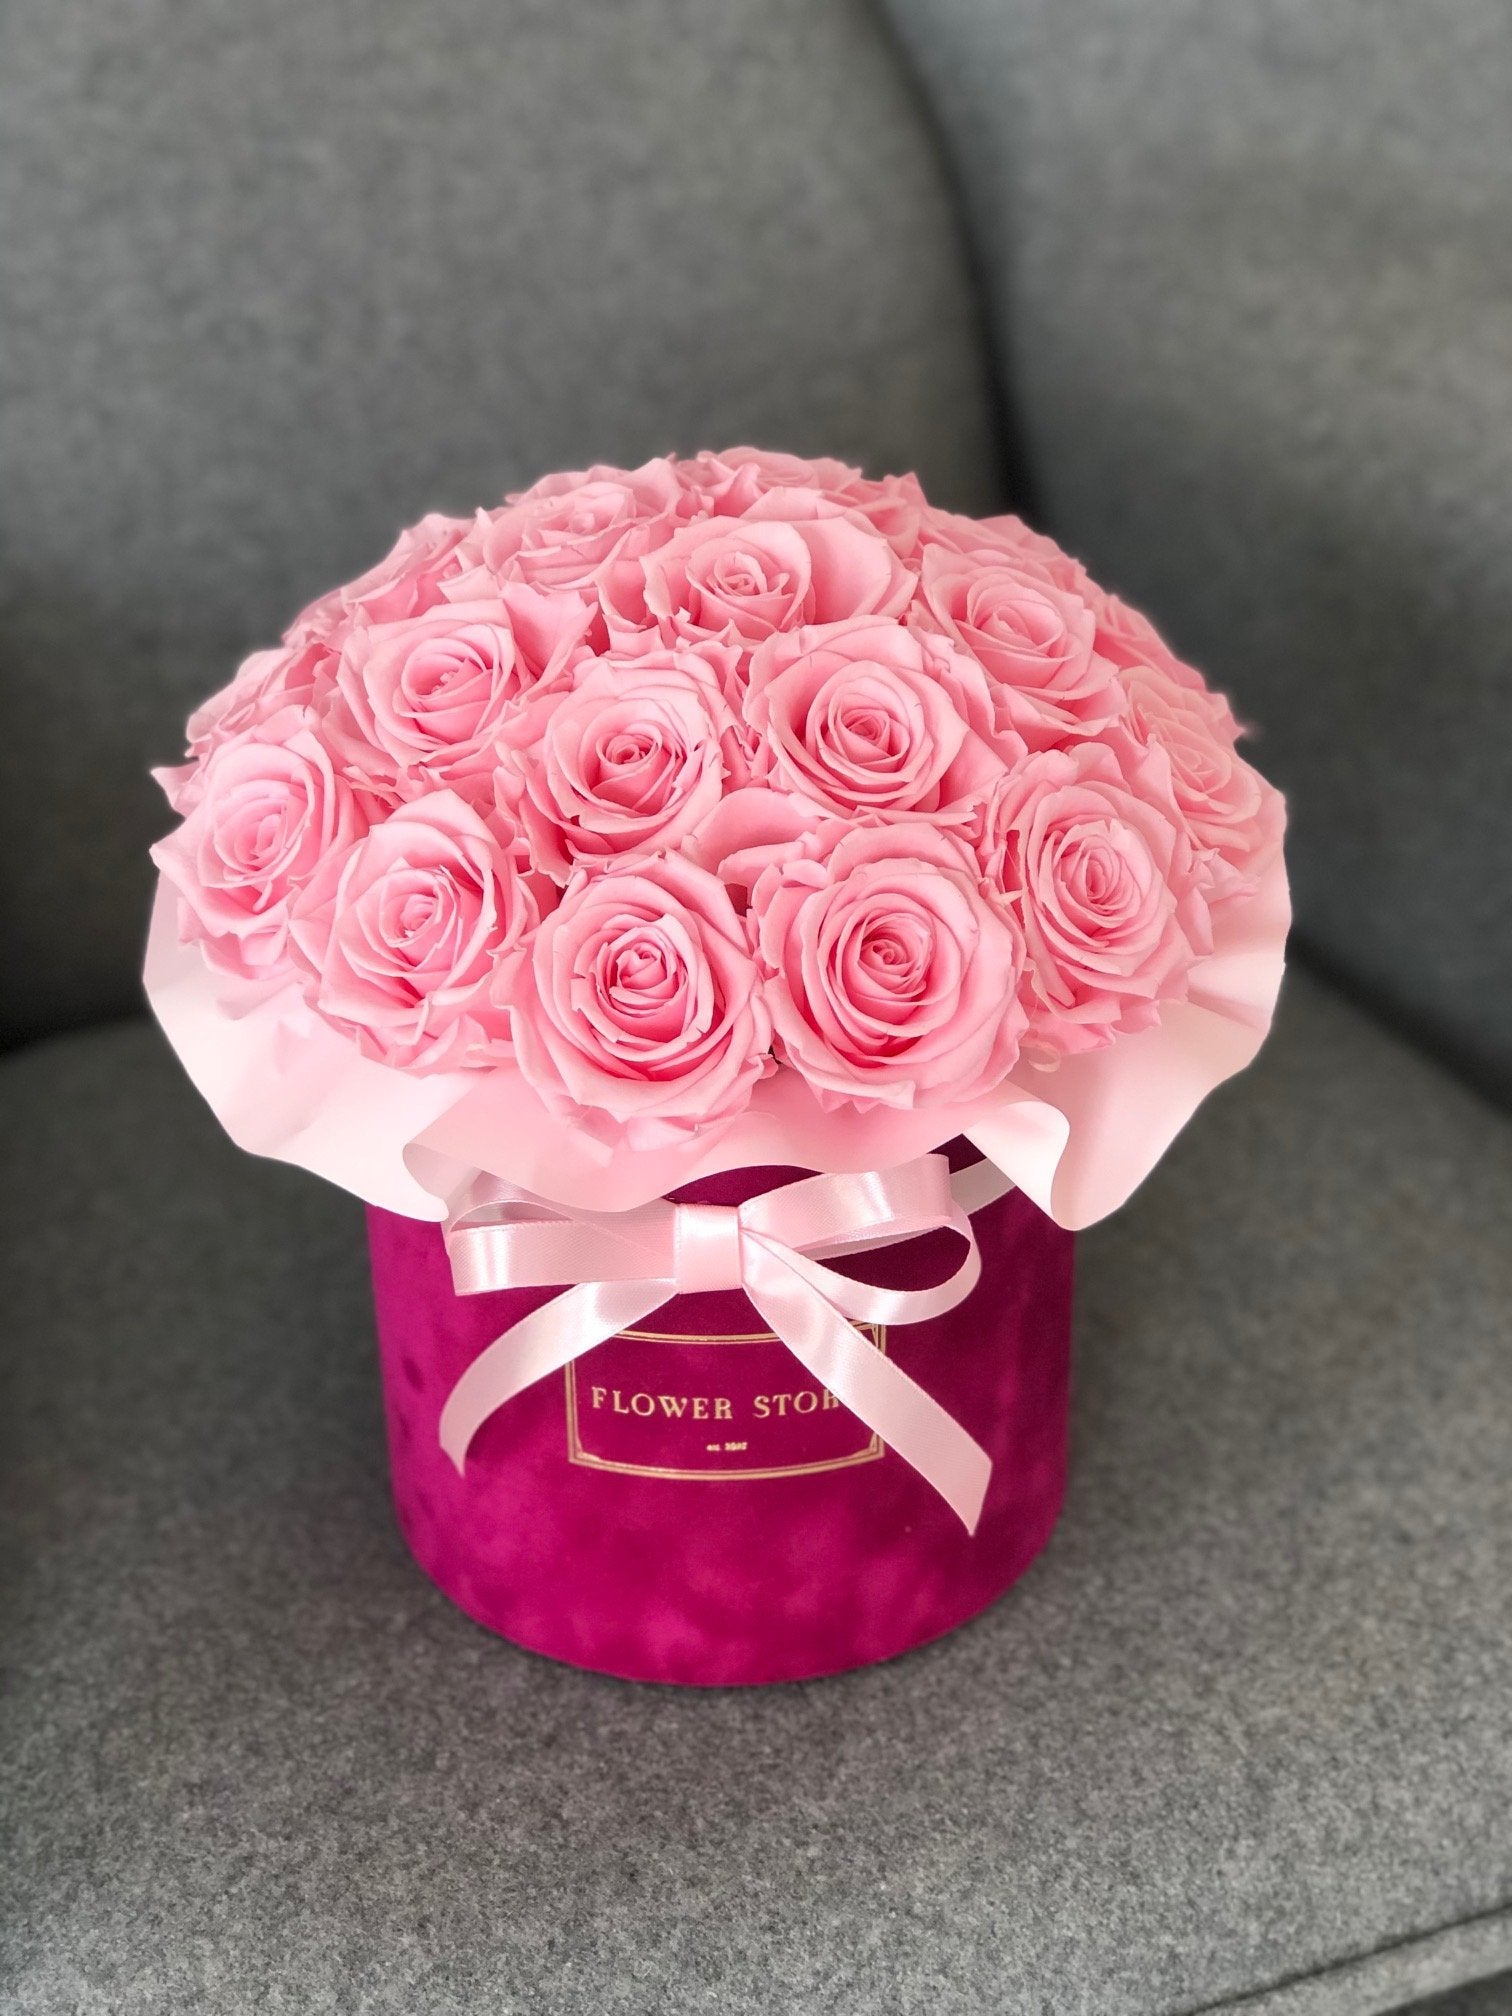 Fuchsia flocked flowerbox with pink eternal roses - dome